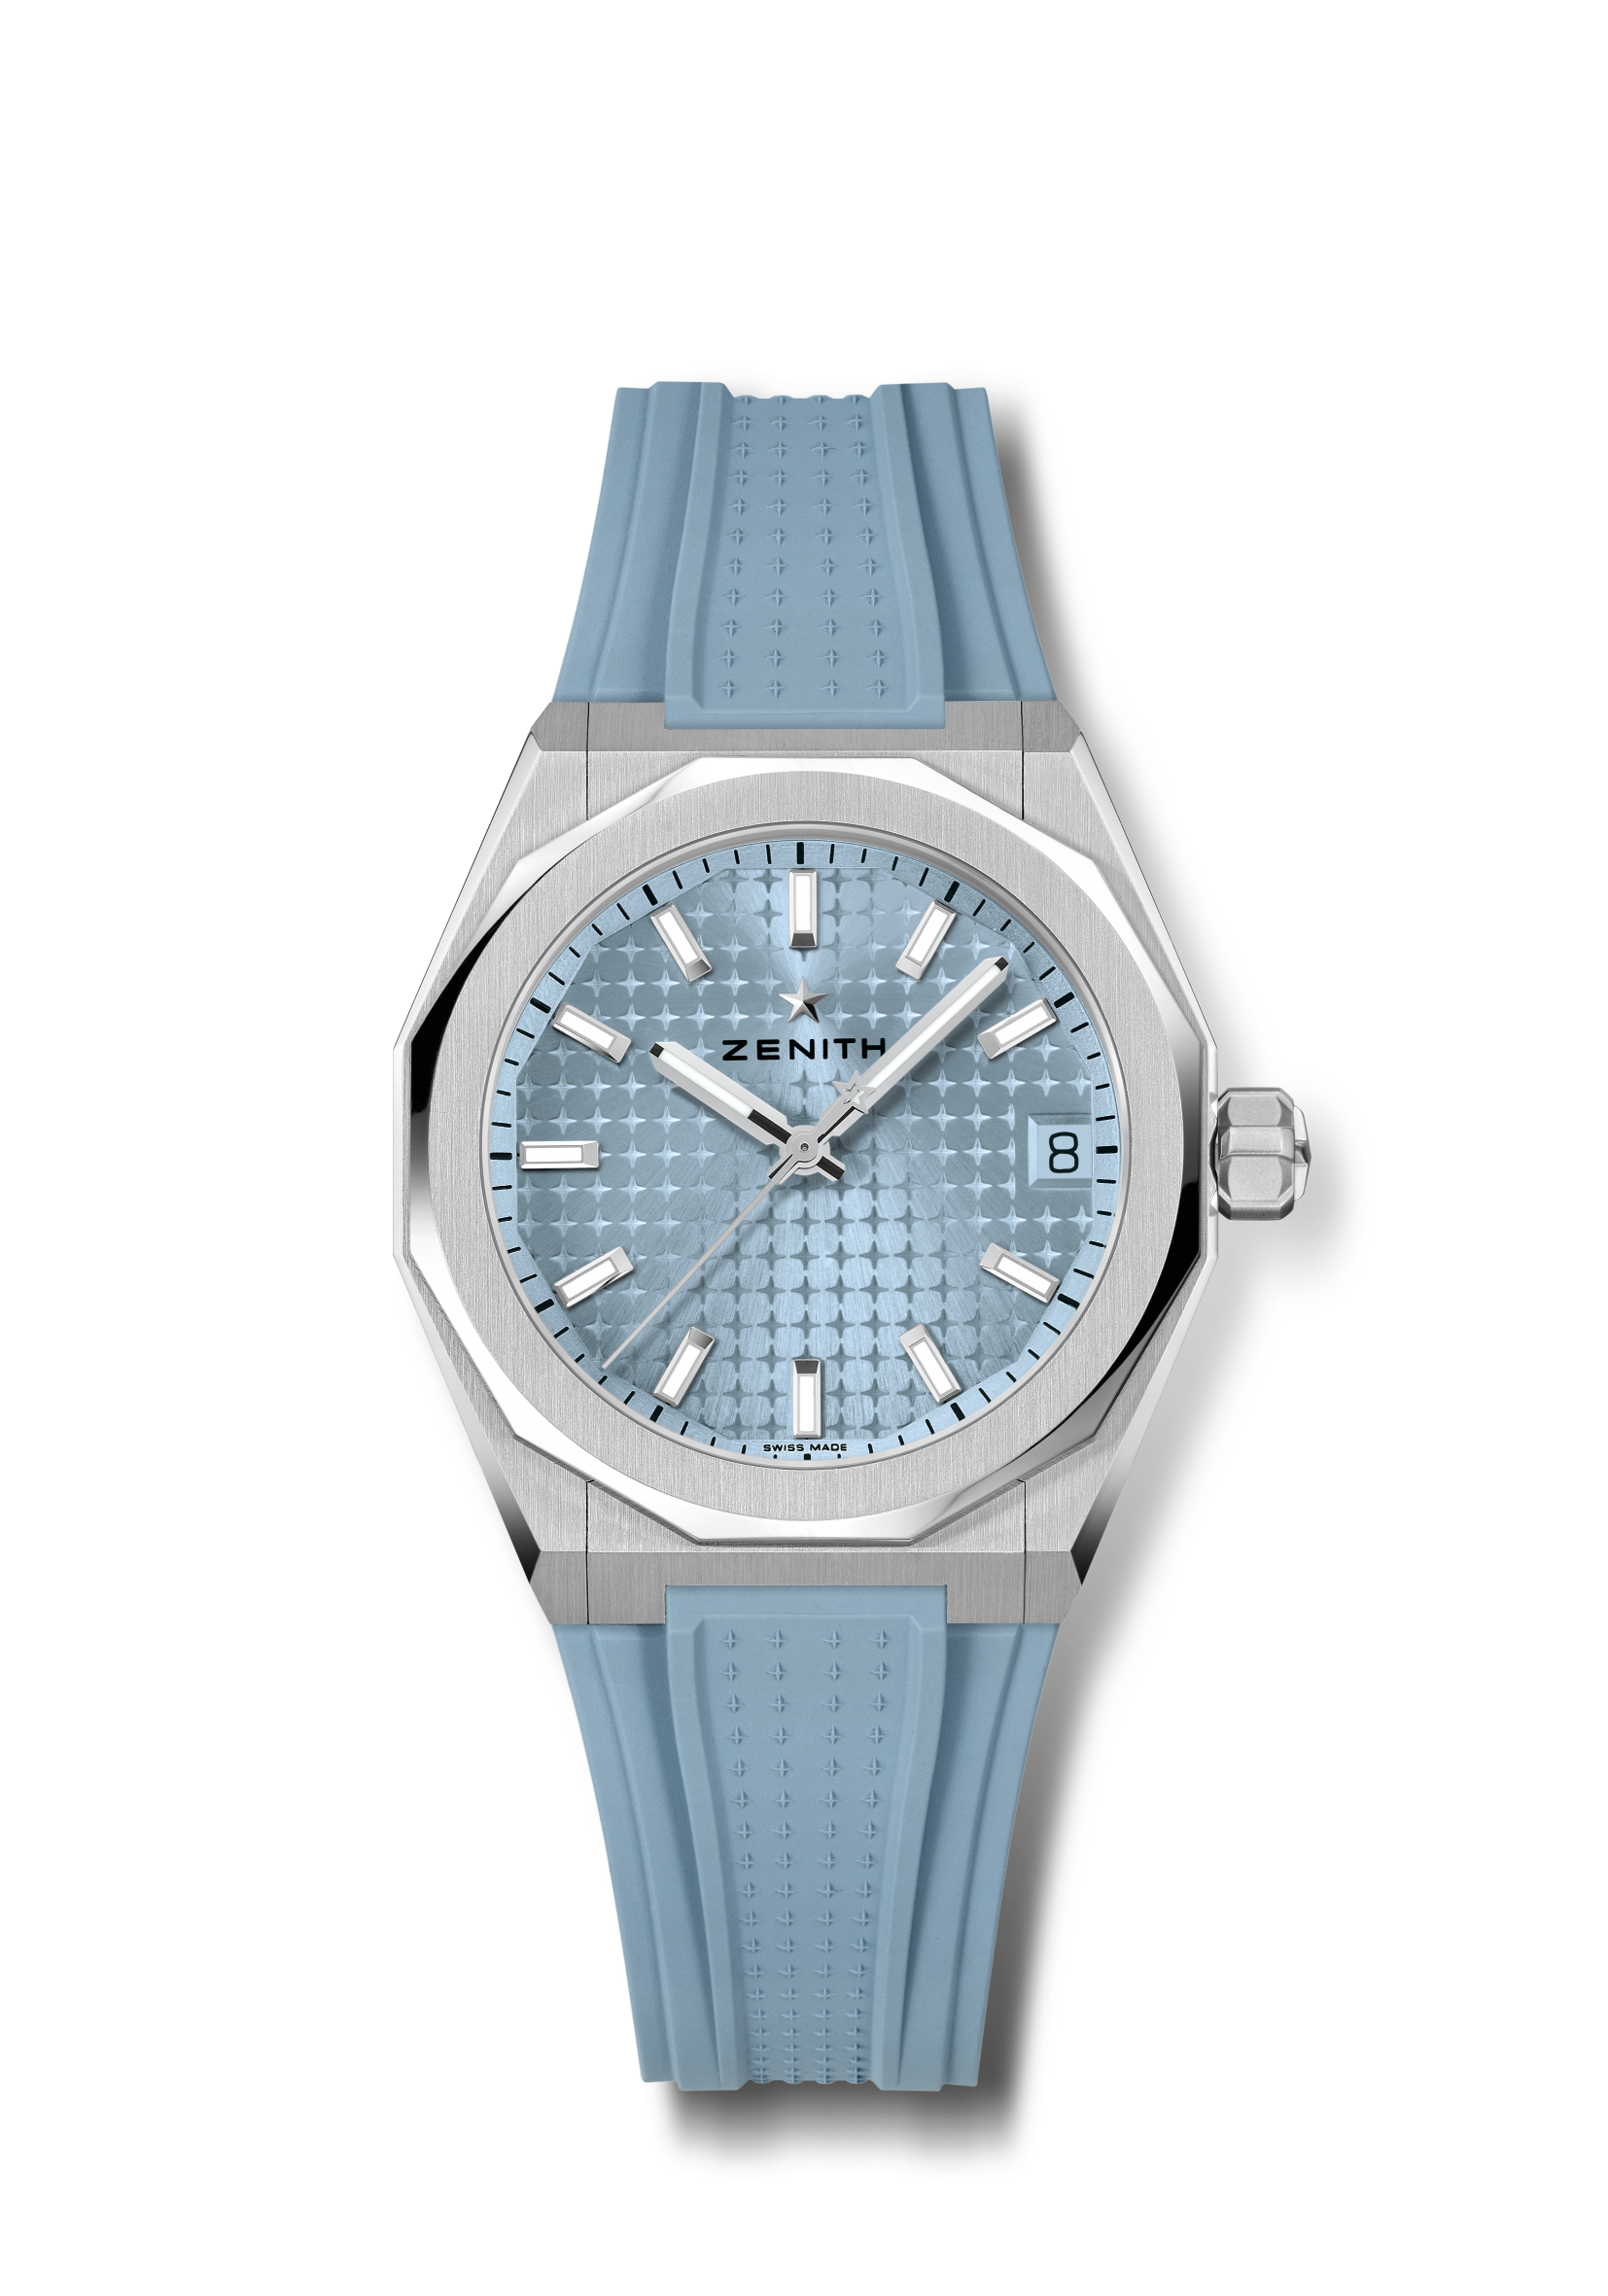 COOL AS ICE: ZENITH LAUNCHES A TRIO OF DEFY SKYLINE BOUTIQUE EDITION WITH  ICE BLUE DIALS – Zenith Pressroom